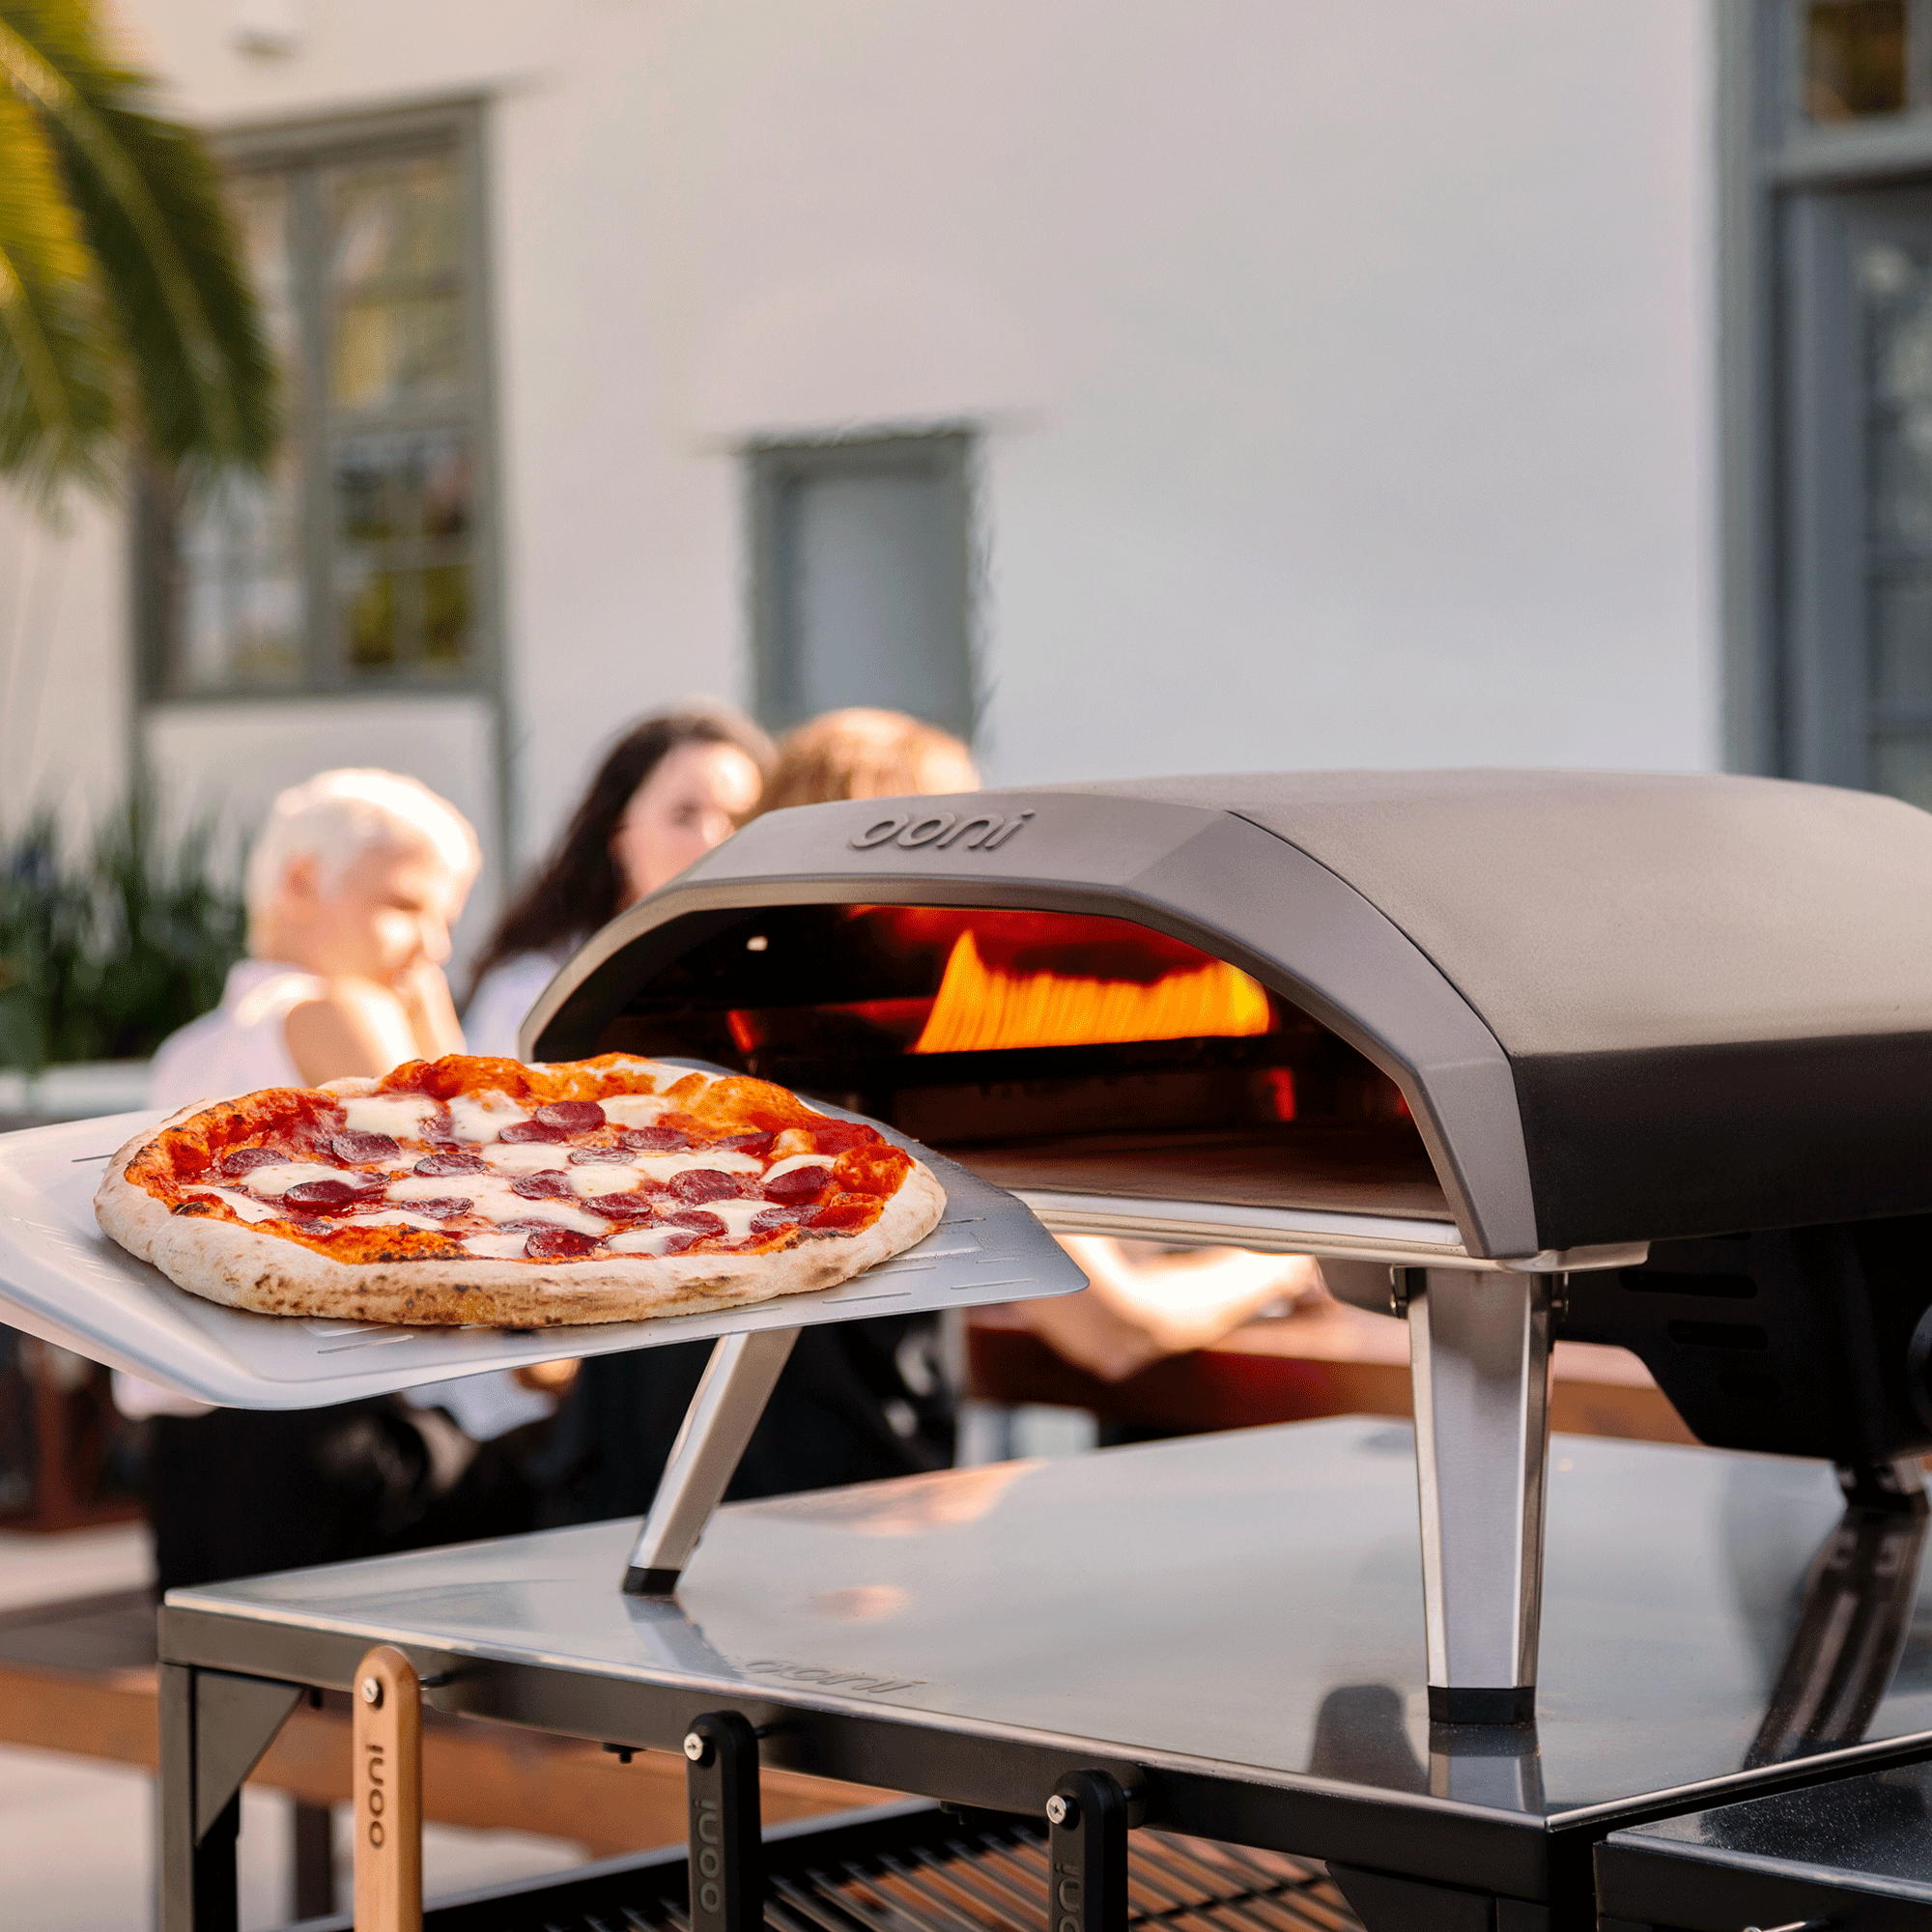 Pizza oven 